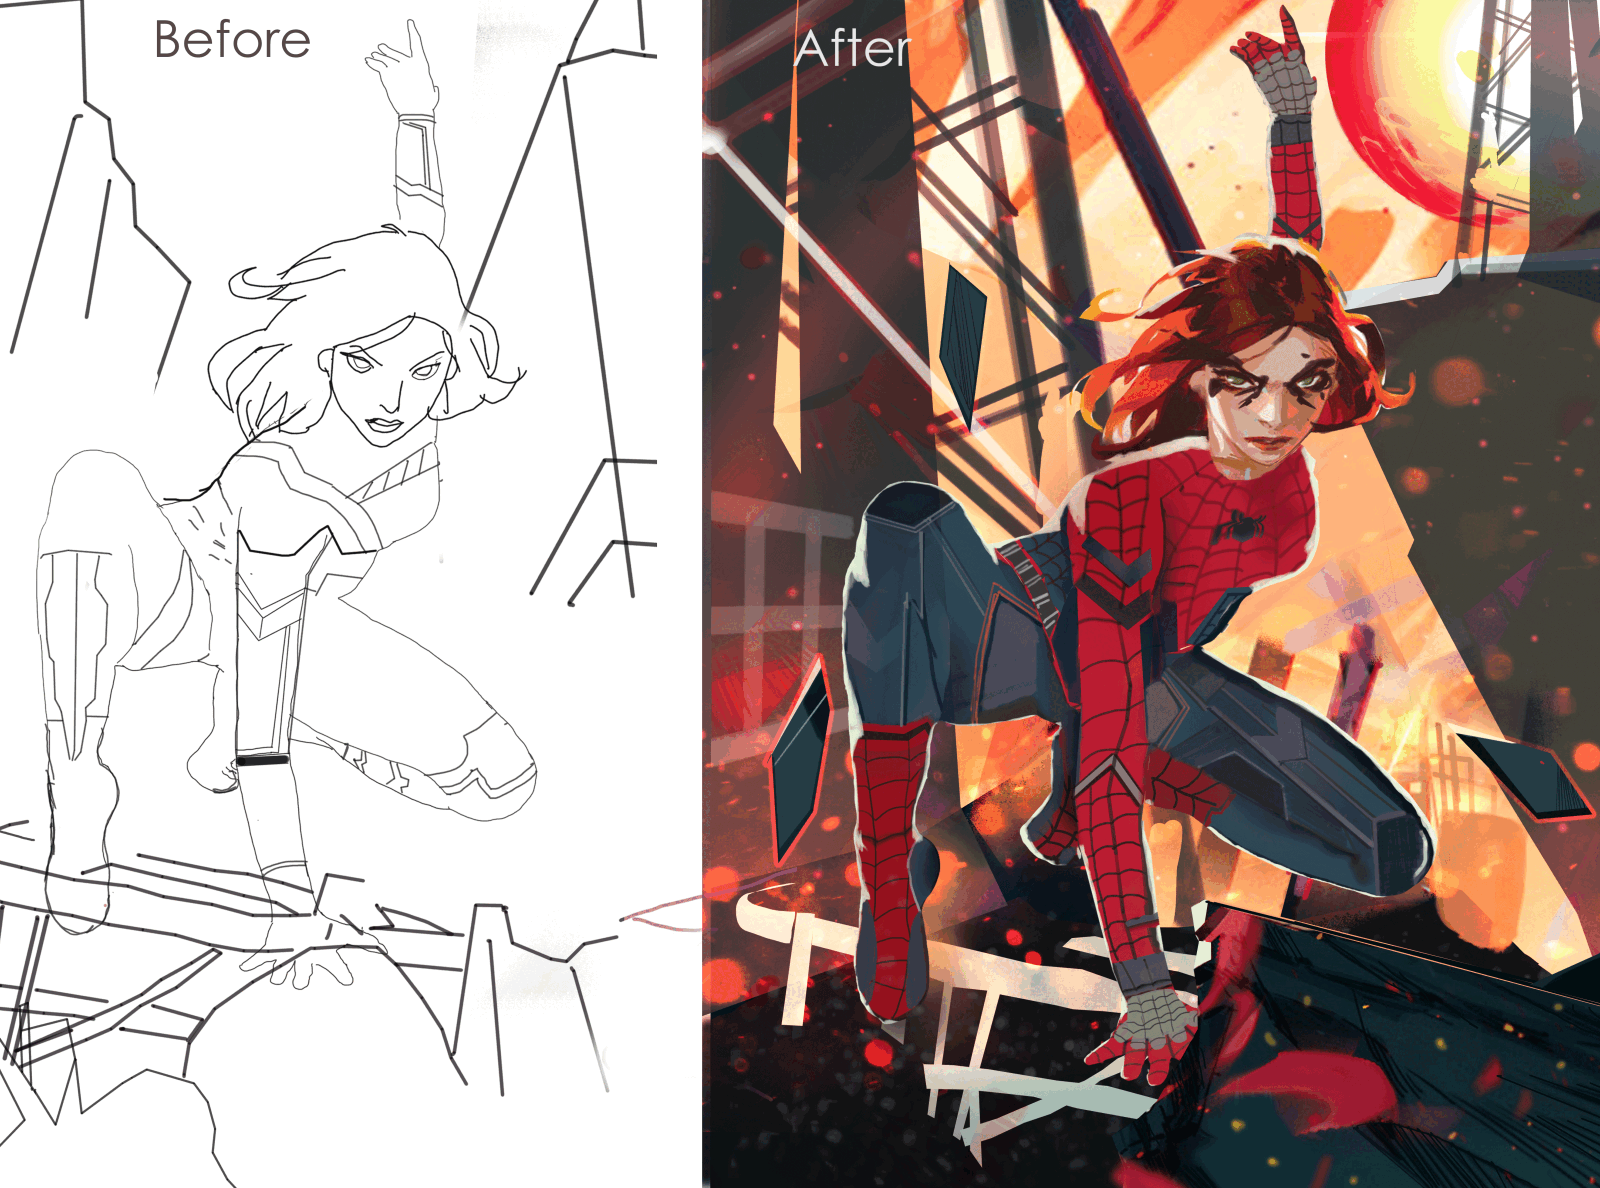 Spider women book cover character design concept art illustration movie poster